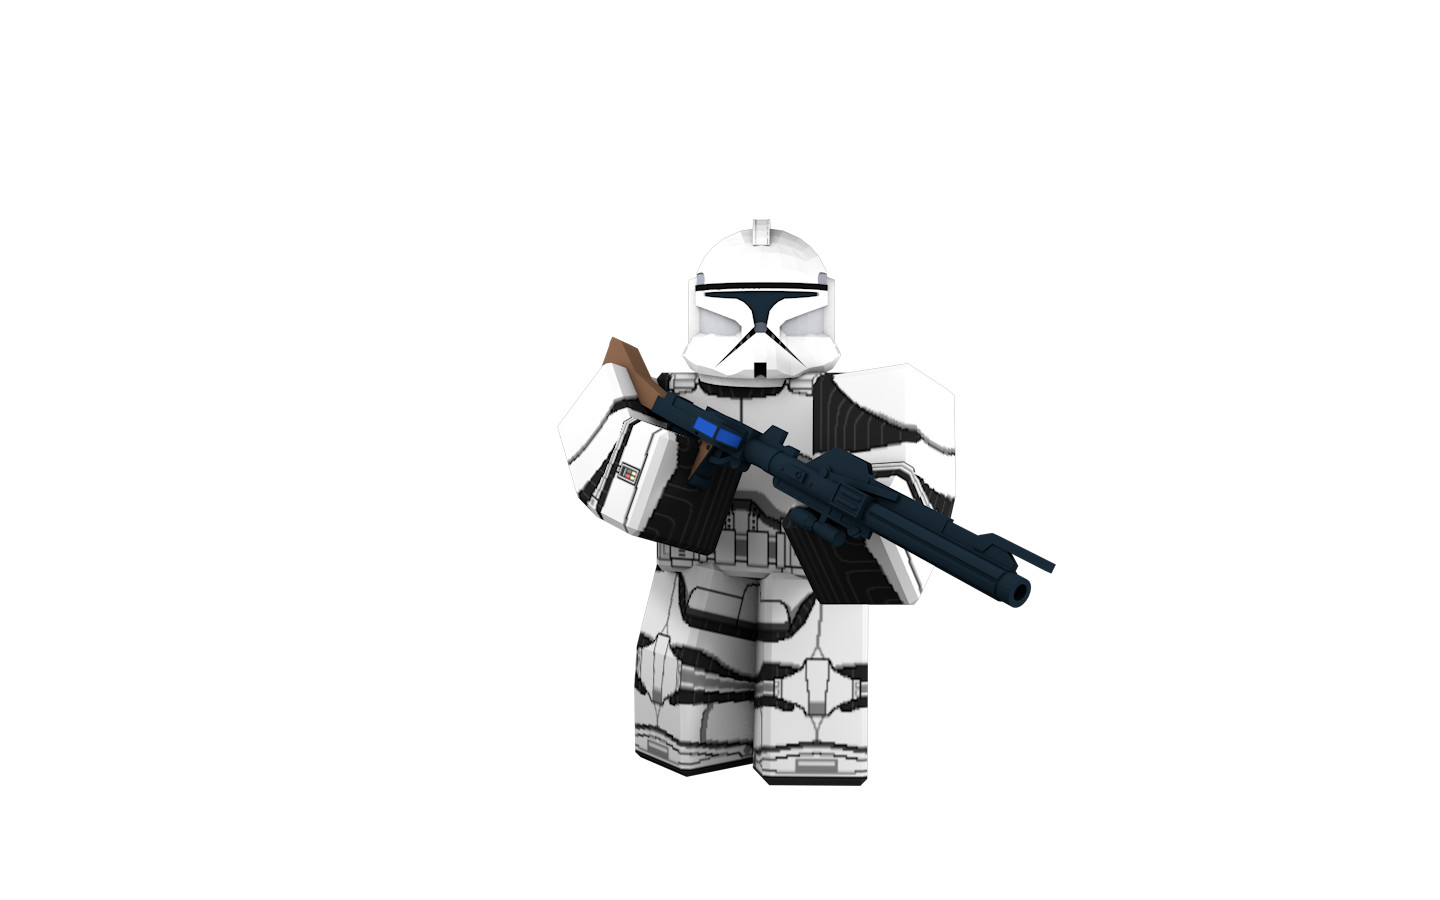 Roblox Star Wars Pictures Promo Codes In Roblox To Get Robux - anakin skywalker roblox gfx by kraminox on deviantart